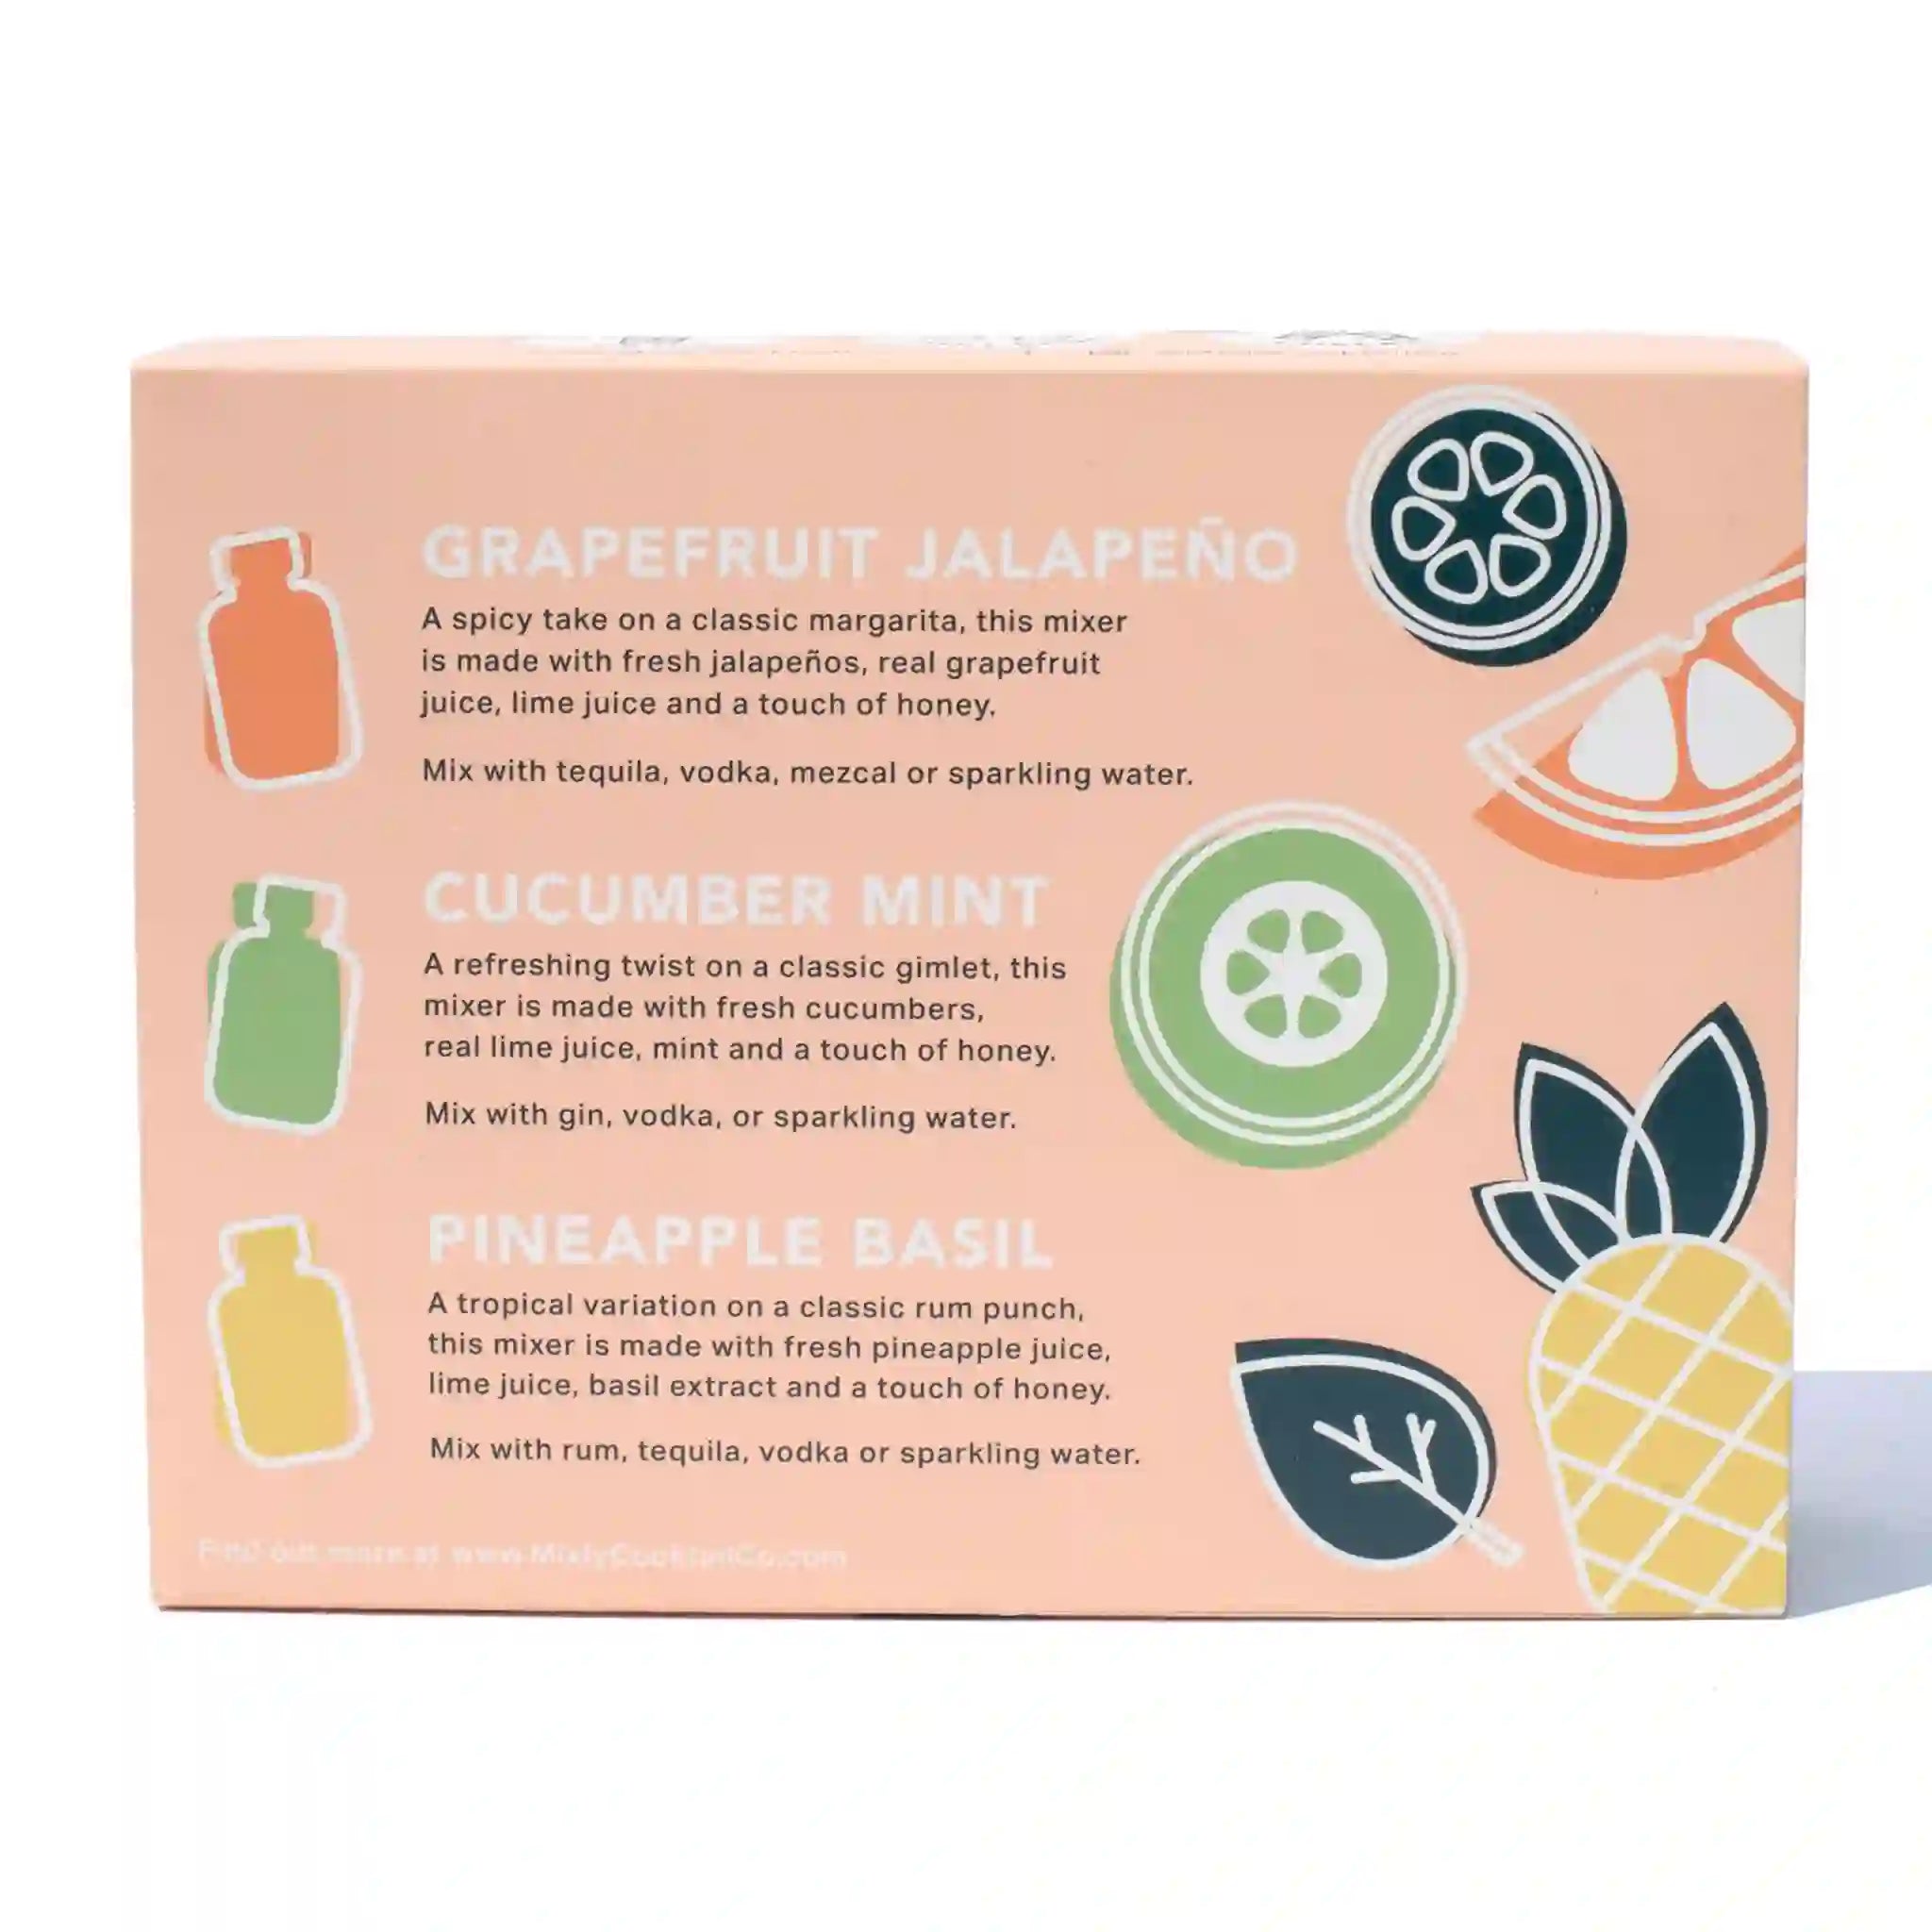 On a white background is the backside of the box with informative information about each cocktail mix including Grapefruit Jalapeño, Cucumber Mint, and Pineapple Basil. 